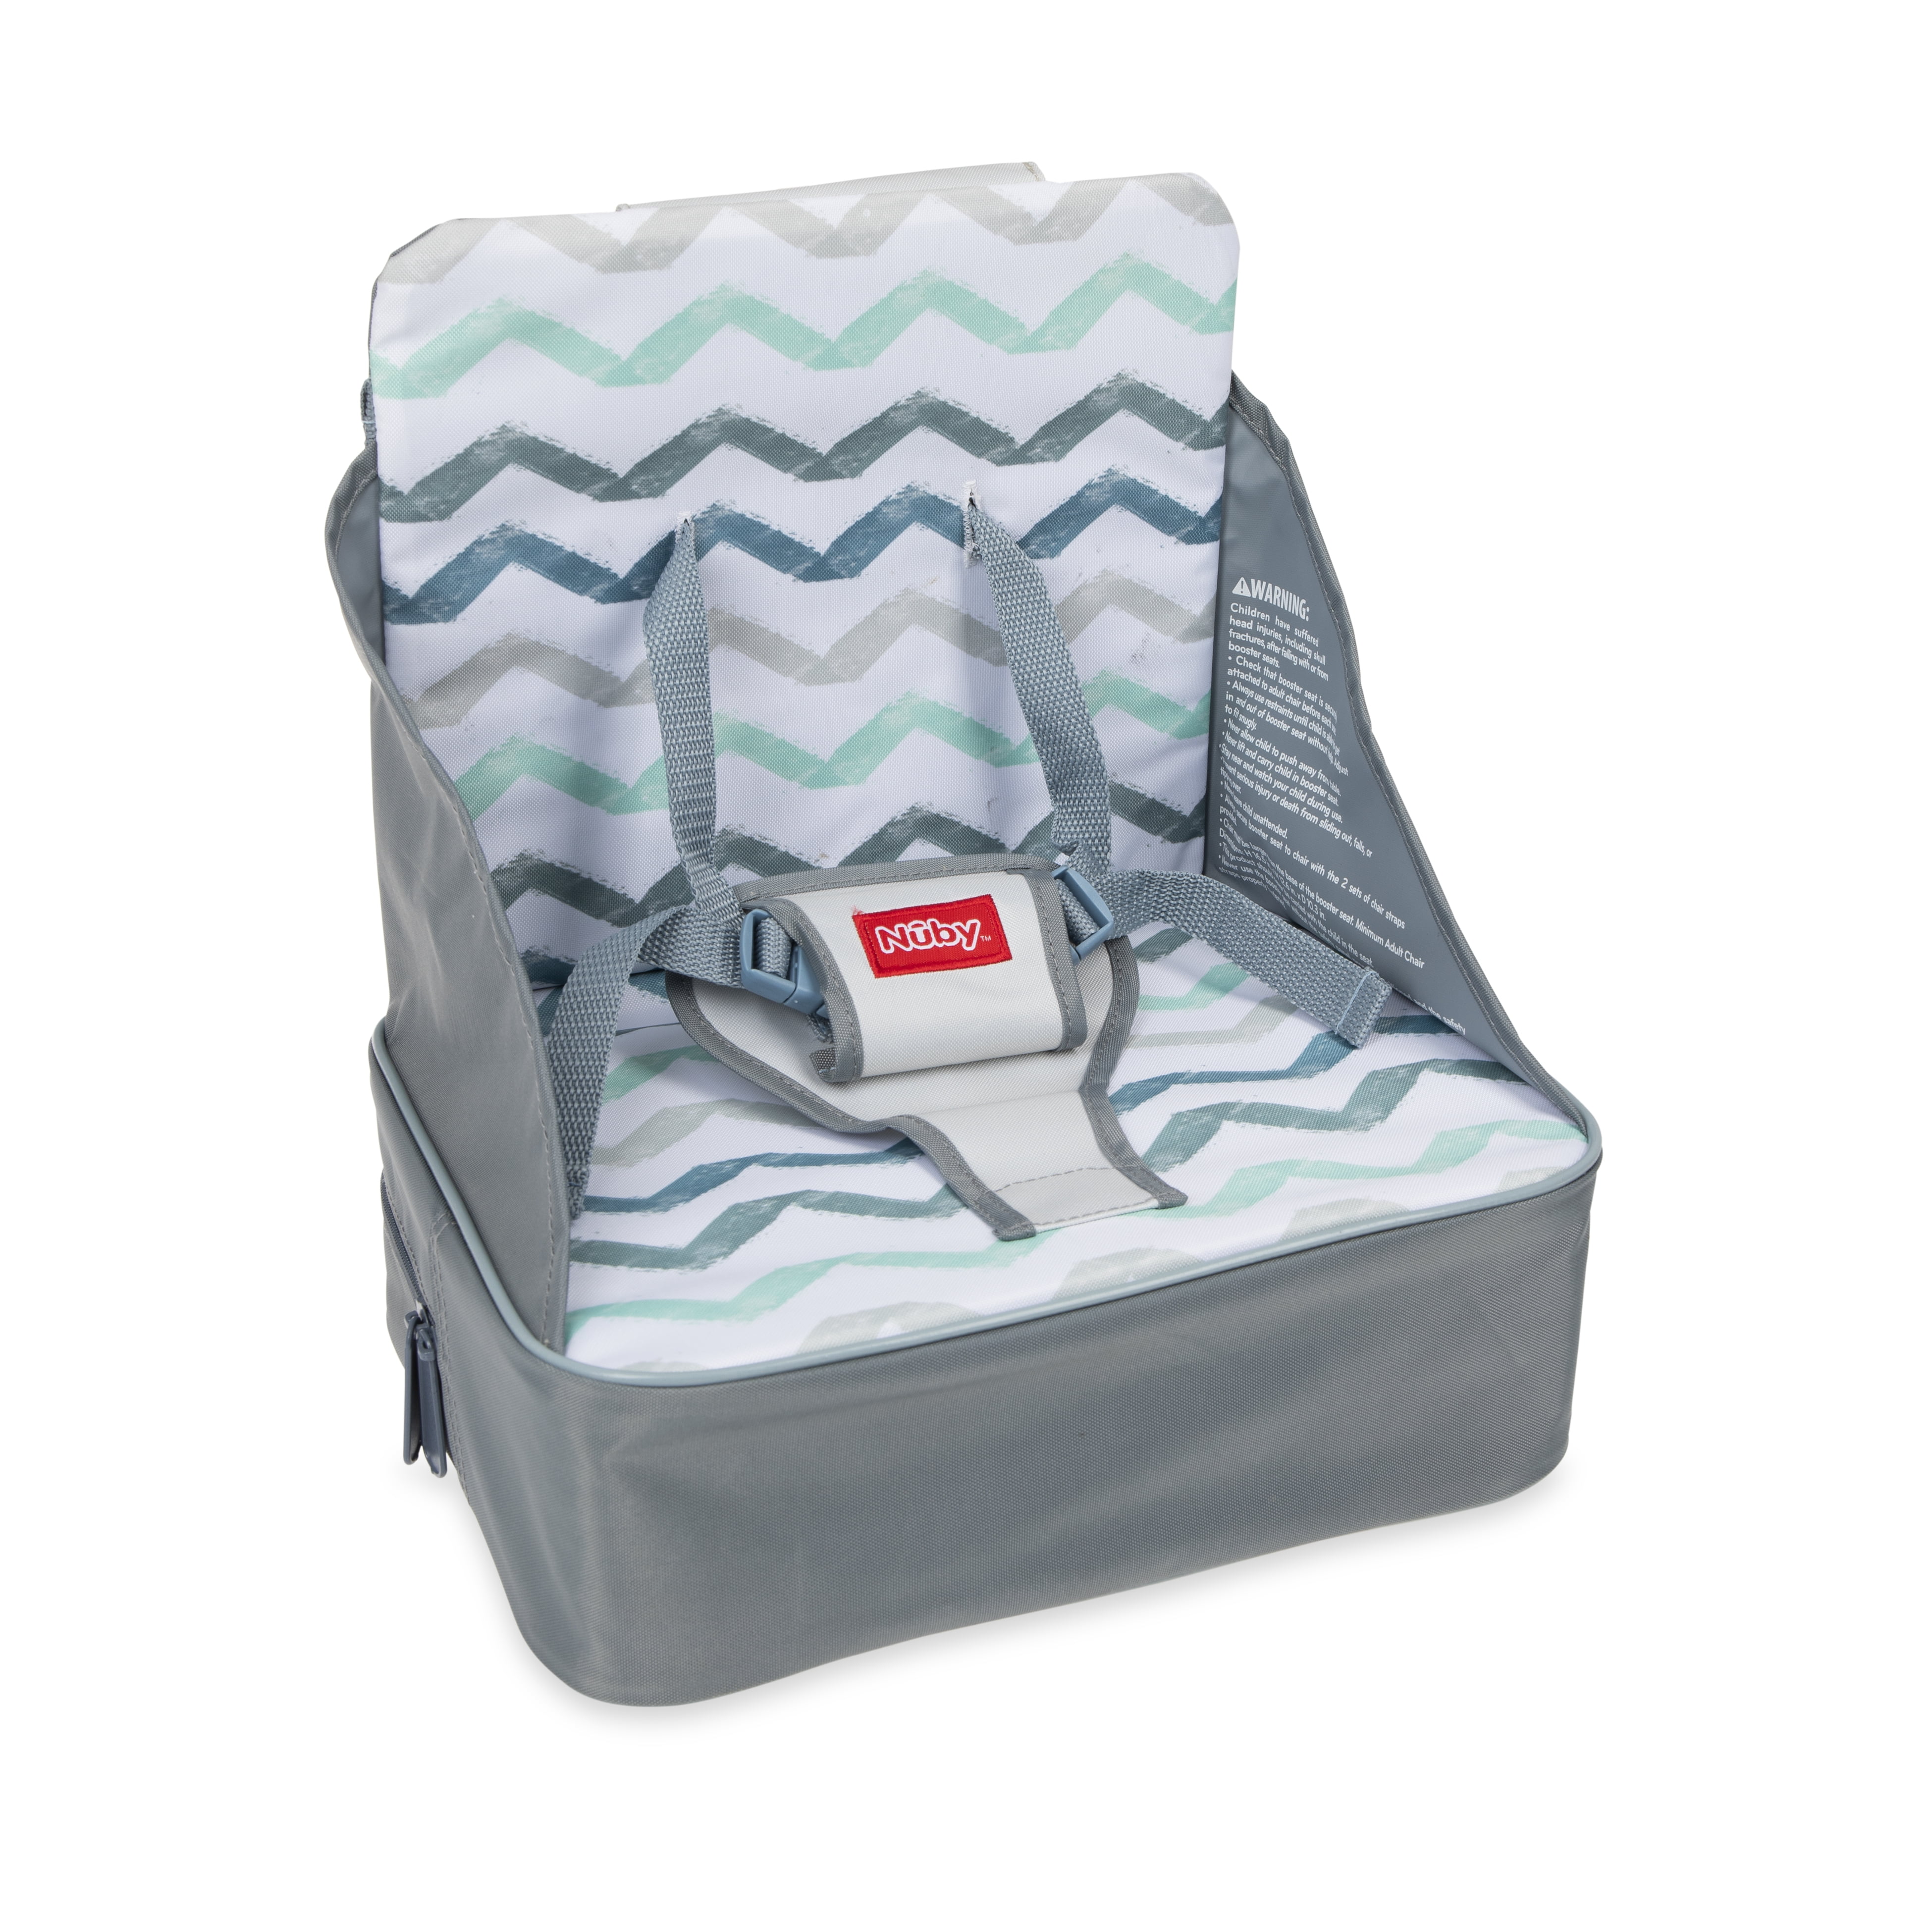 Chevron Nuby Easy Go Safety Lightweight High Chair Booster Seat Great for Travel 